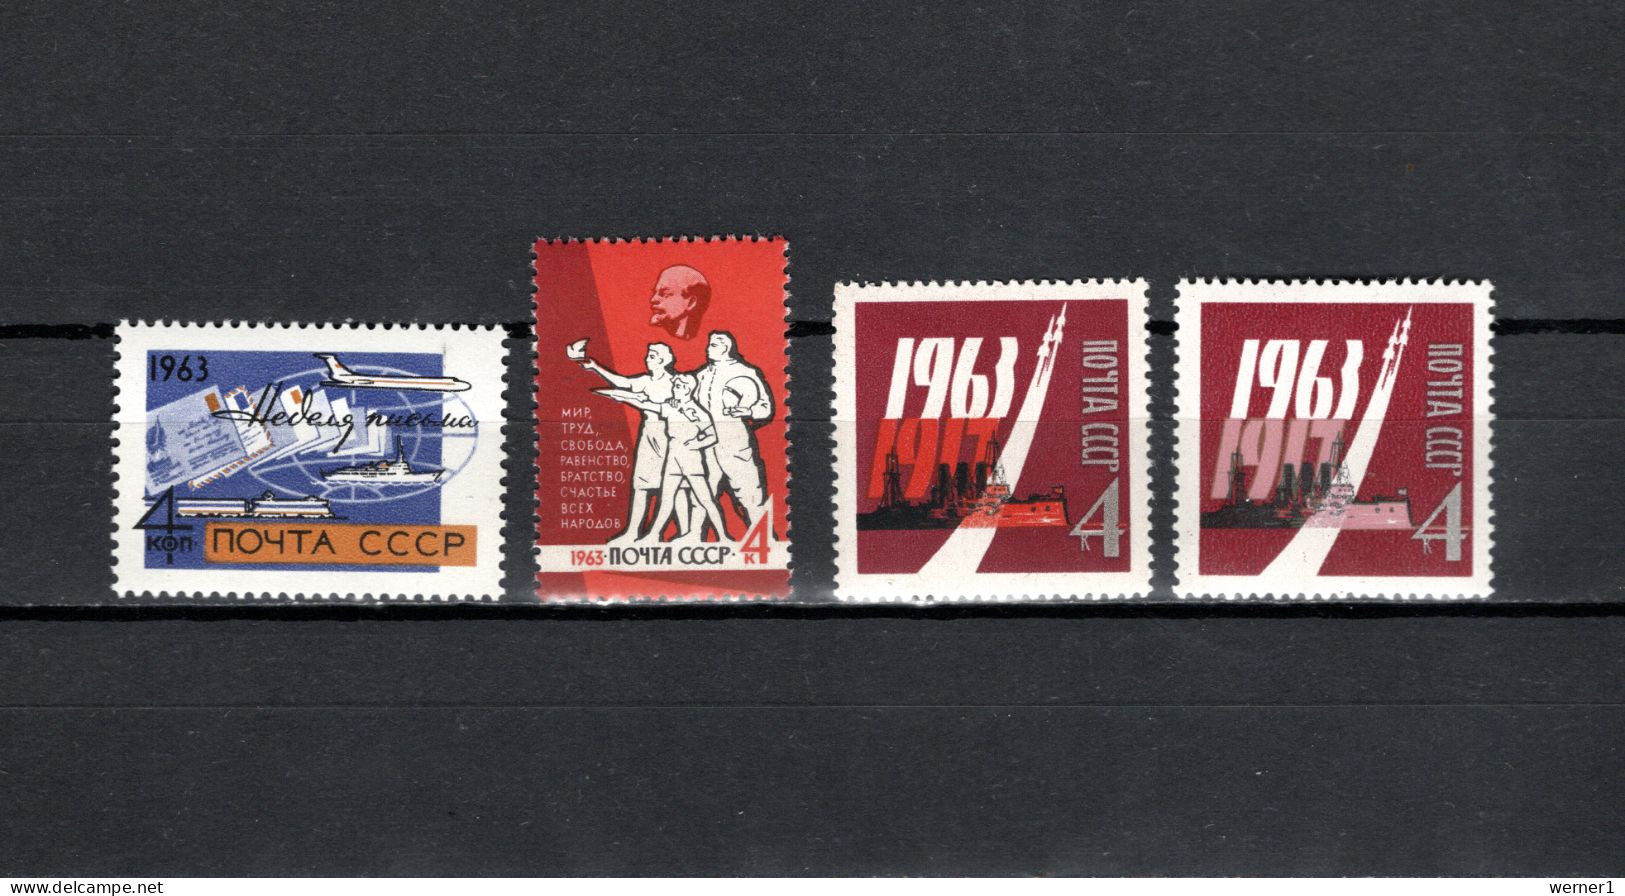 USSR Russia 1963 Space, Letter Week, Cosmonaut, October Revolution 46th Anniv. 4 Stamps MNH - Rusia & URSS